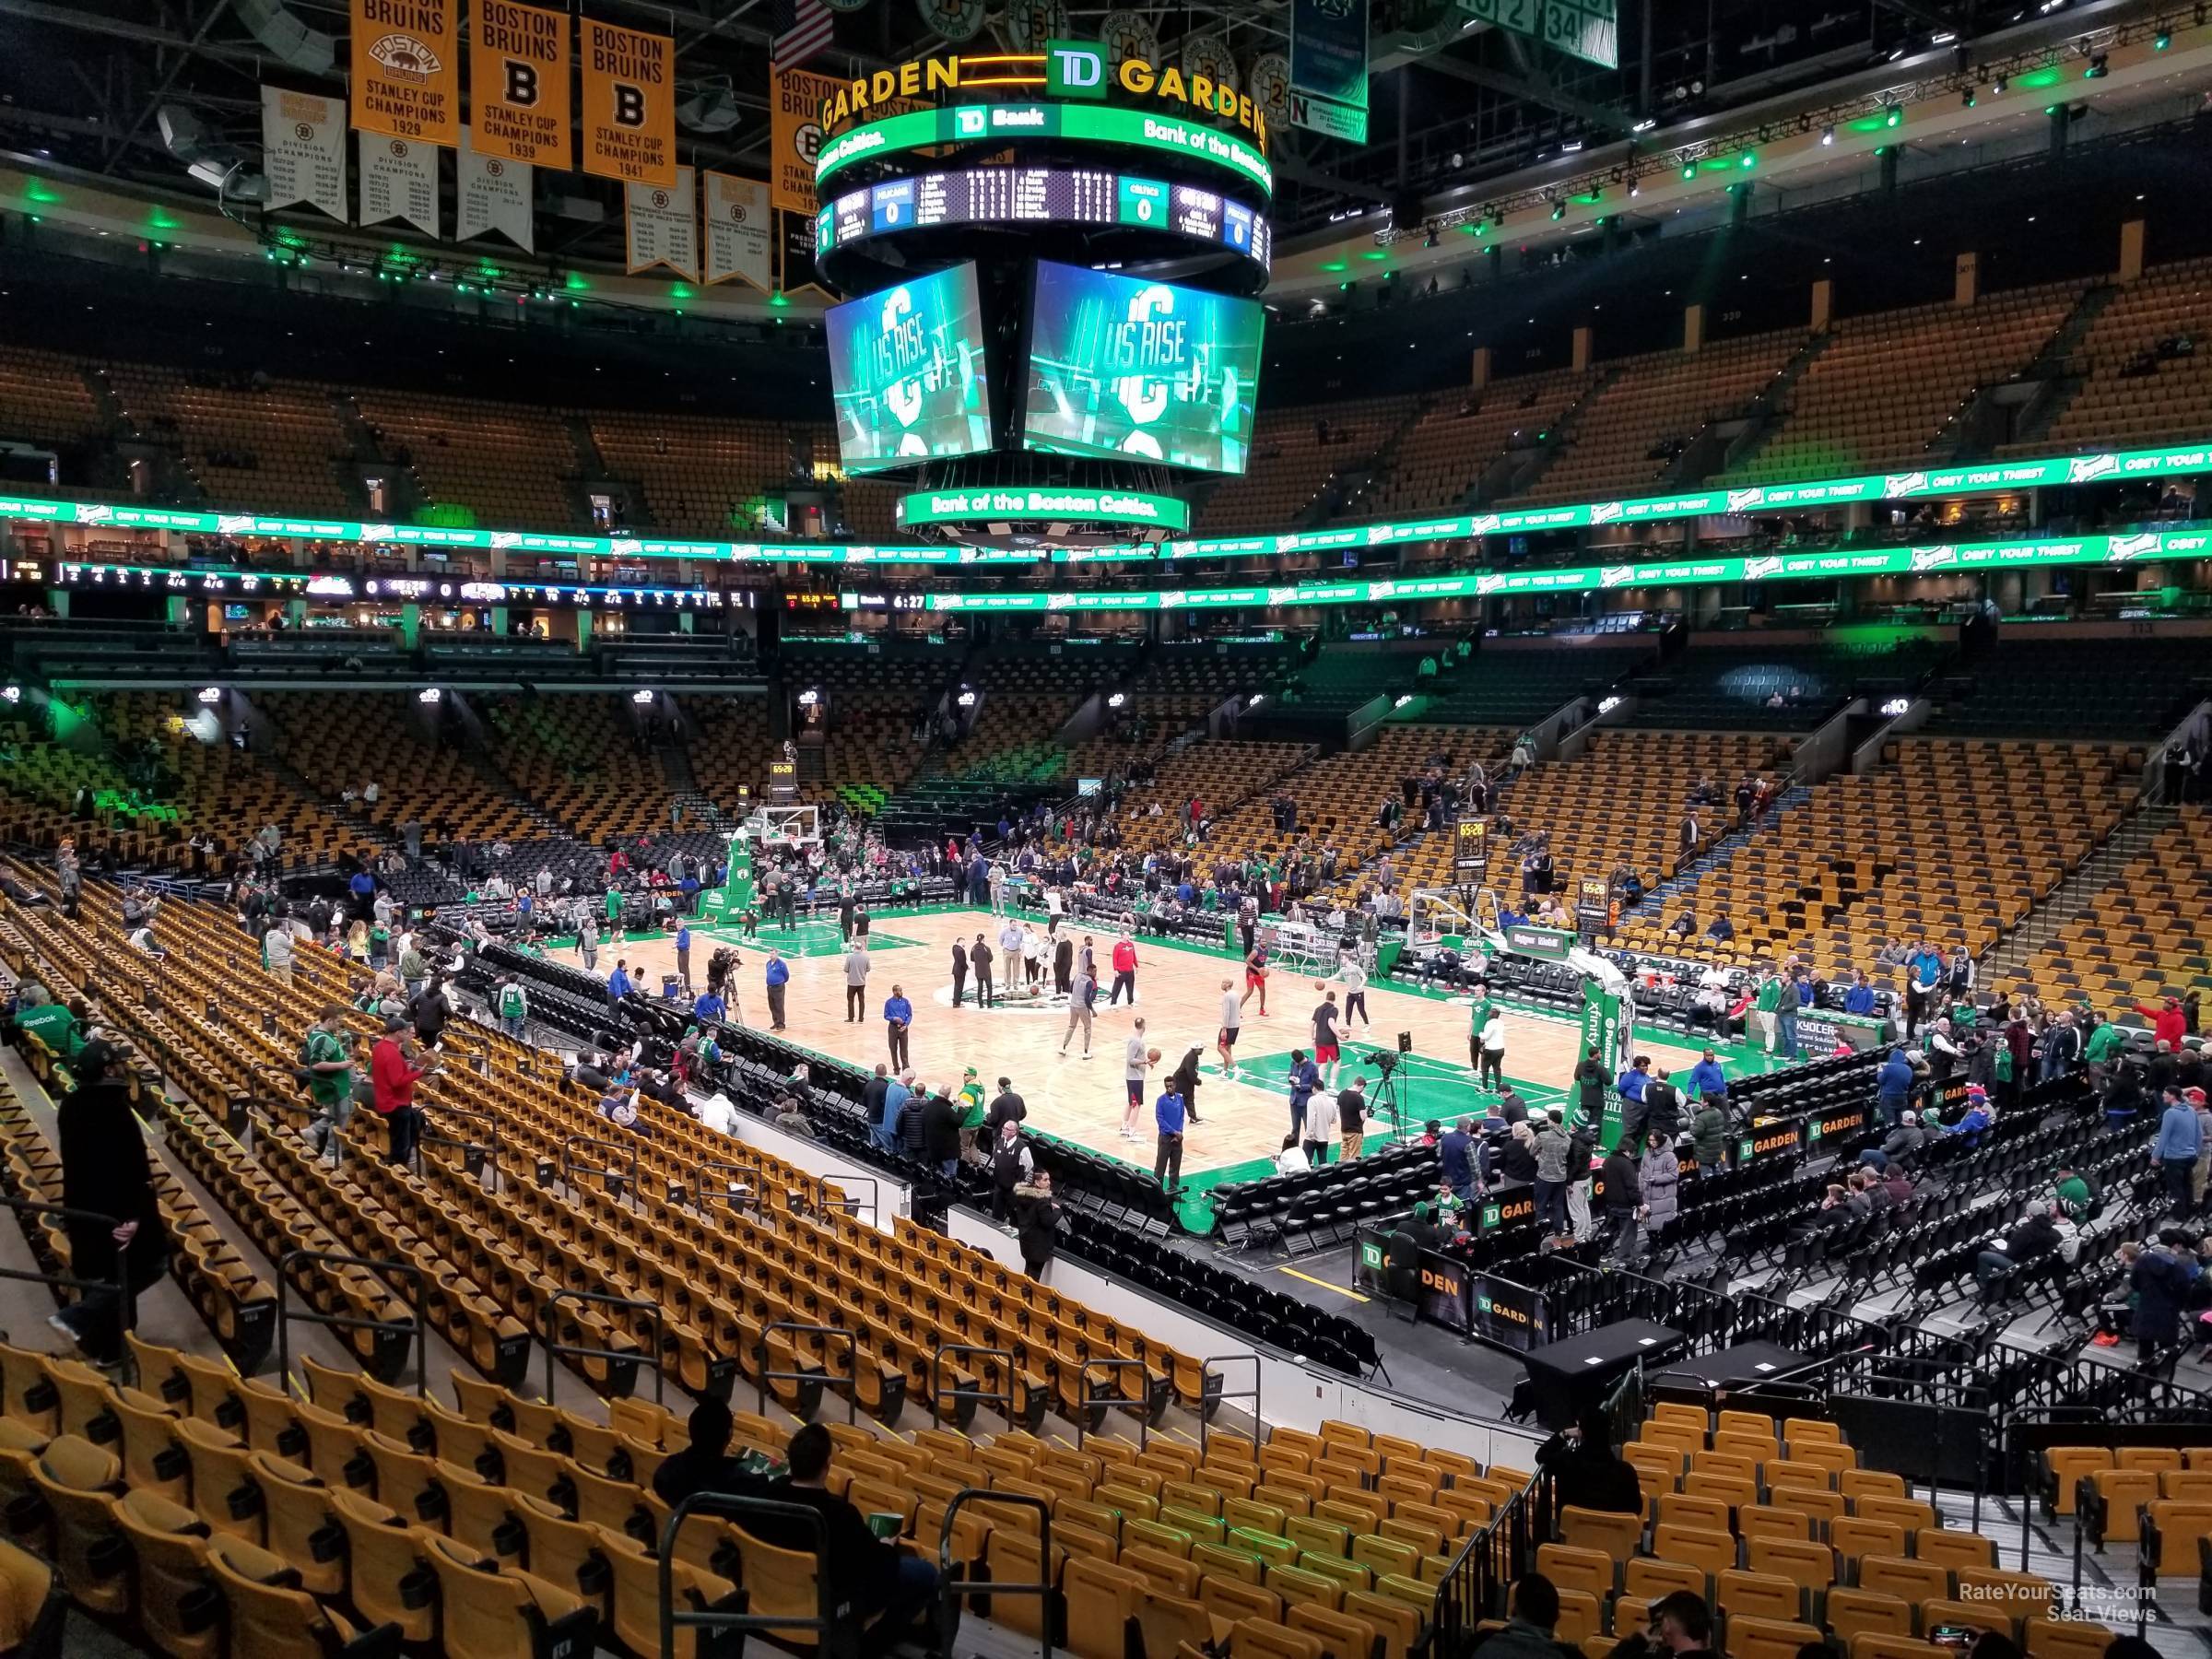 loge 9, row 20 seat view  for basketball - td garden